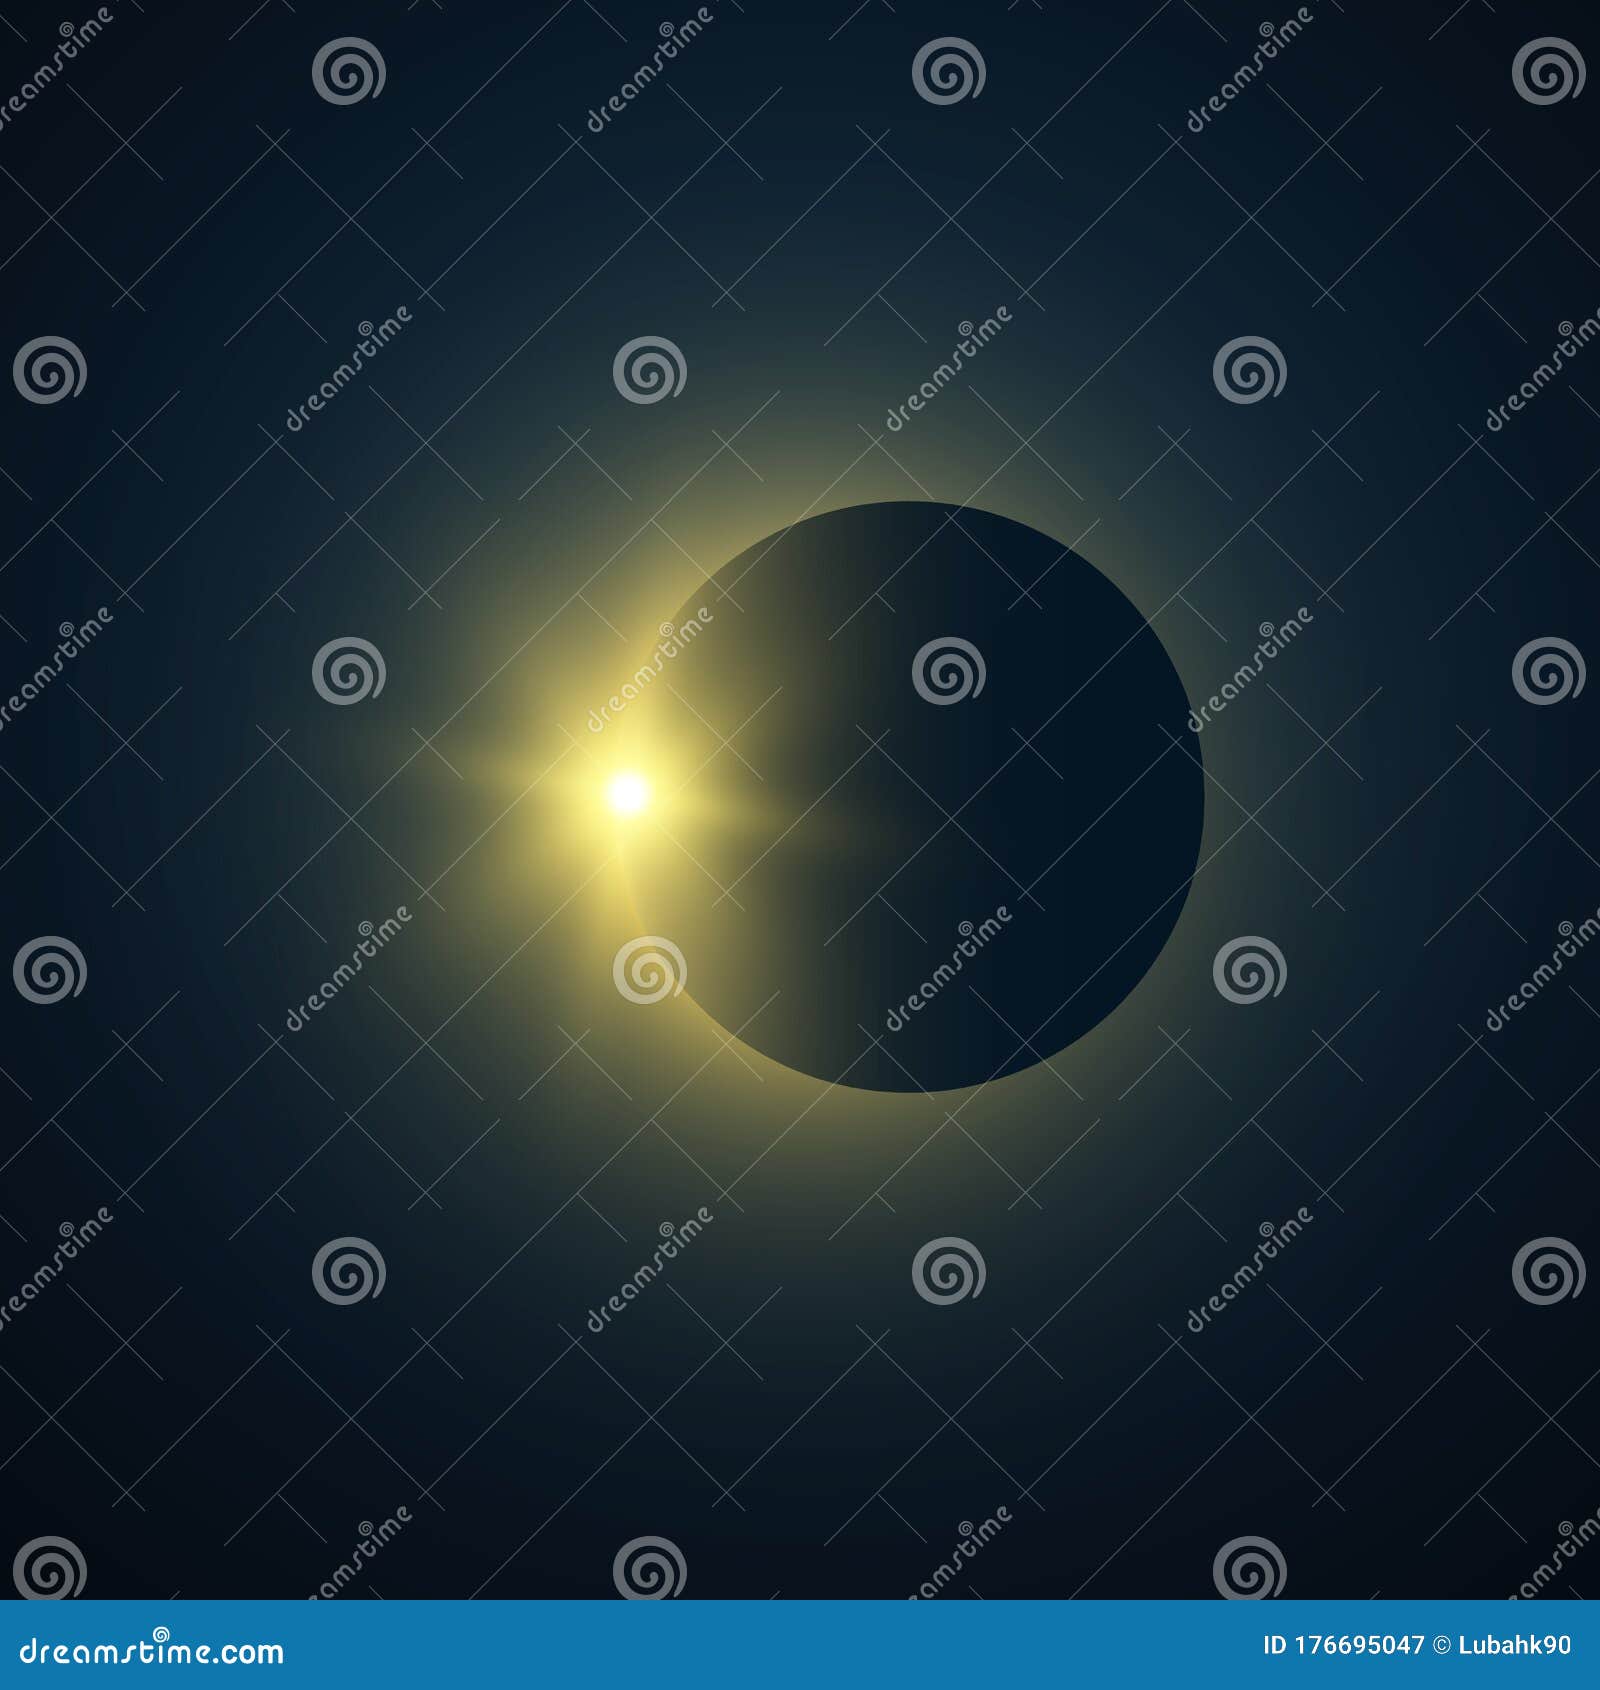 solar eclipse. total eclipse of the sun with corona. full solar eclipse phenomenon. star shining. space background. 